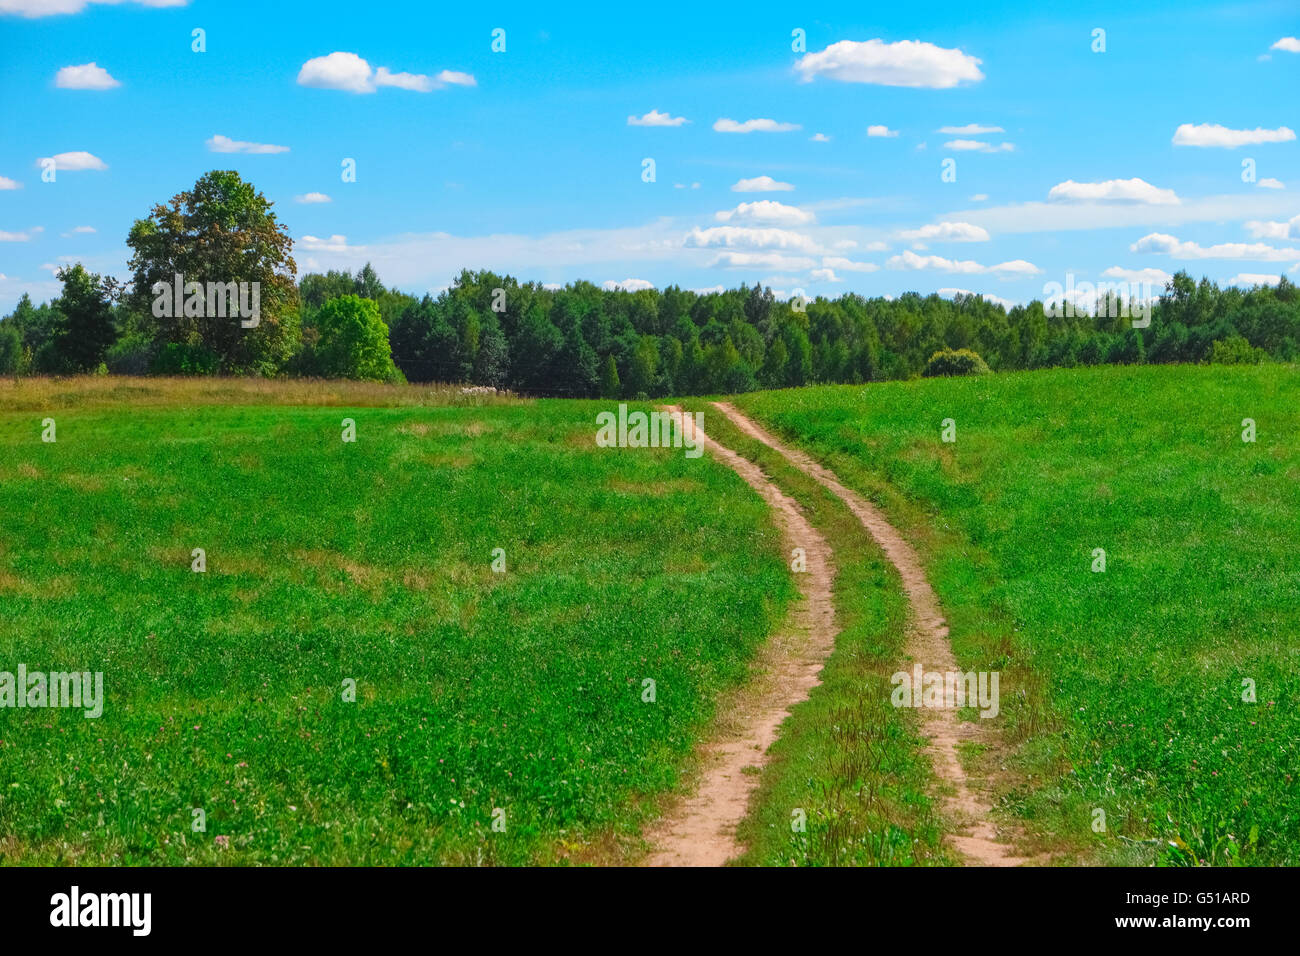 Summer landscape with country road, grass, trees, sky and clouds Stock Photo